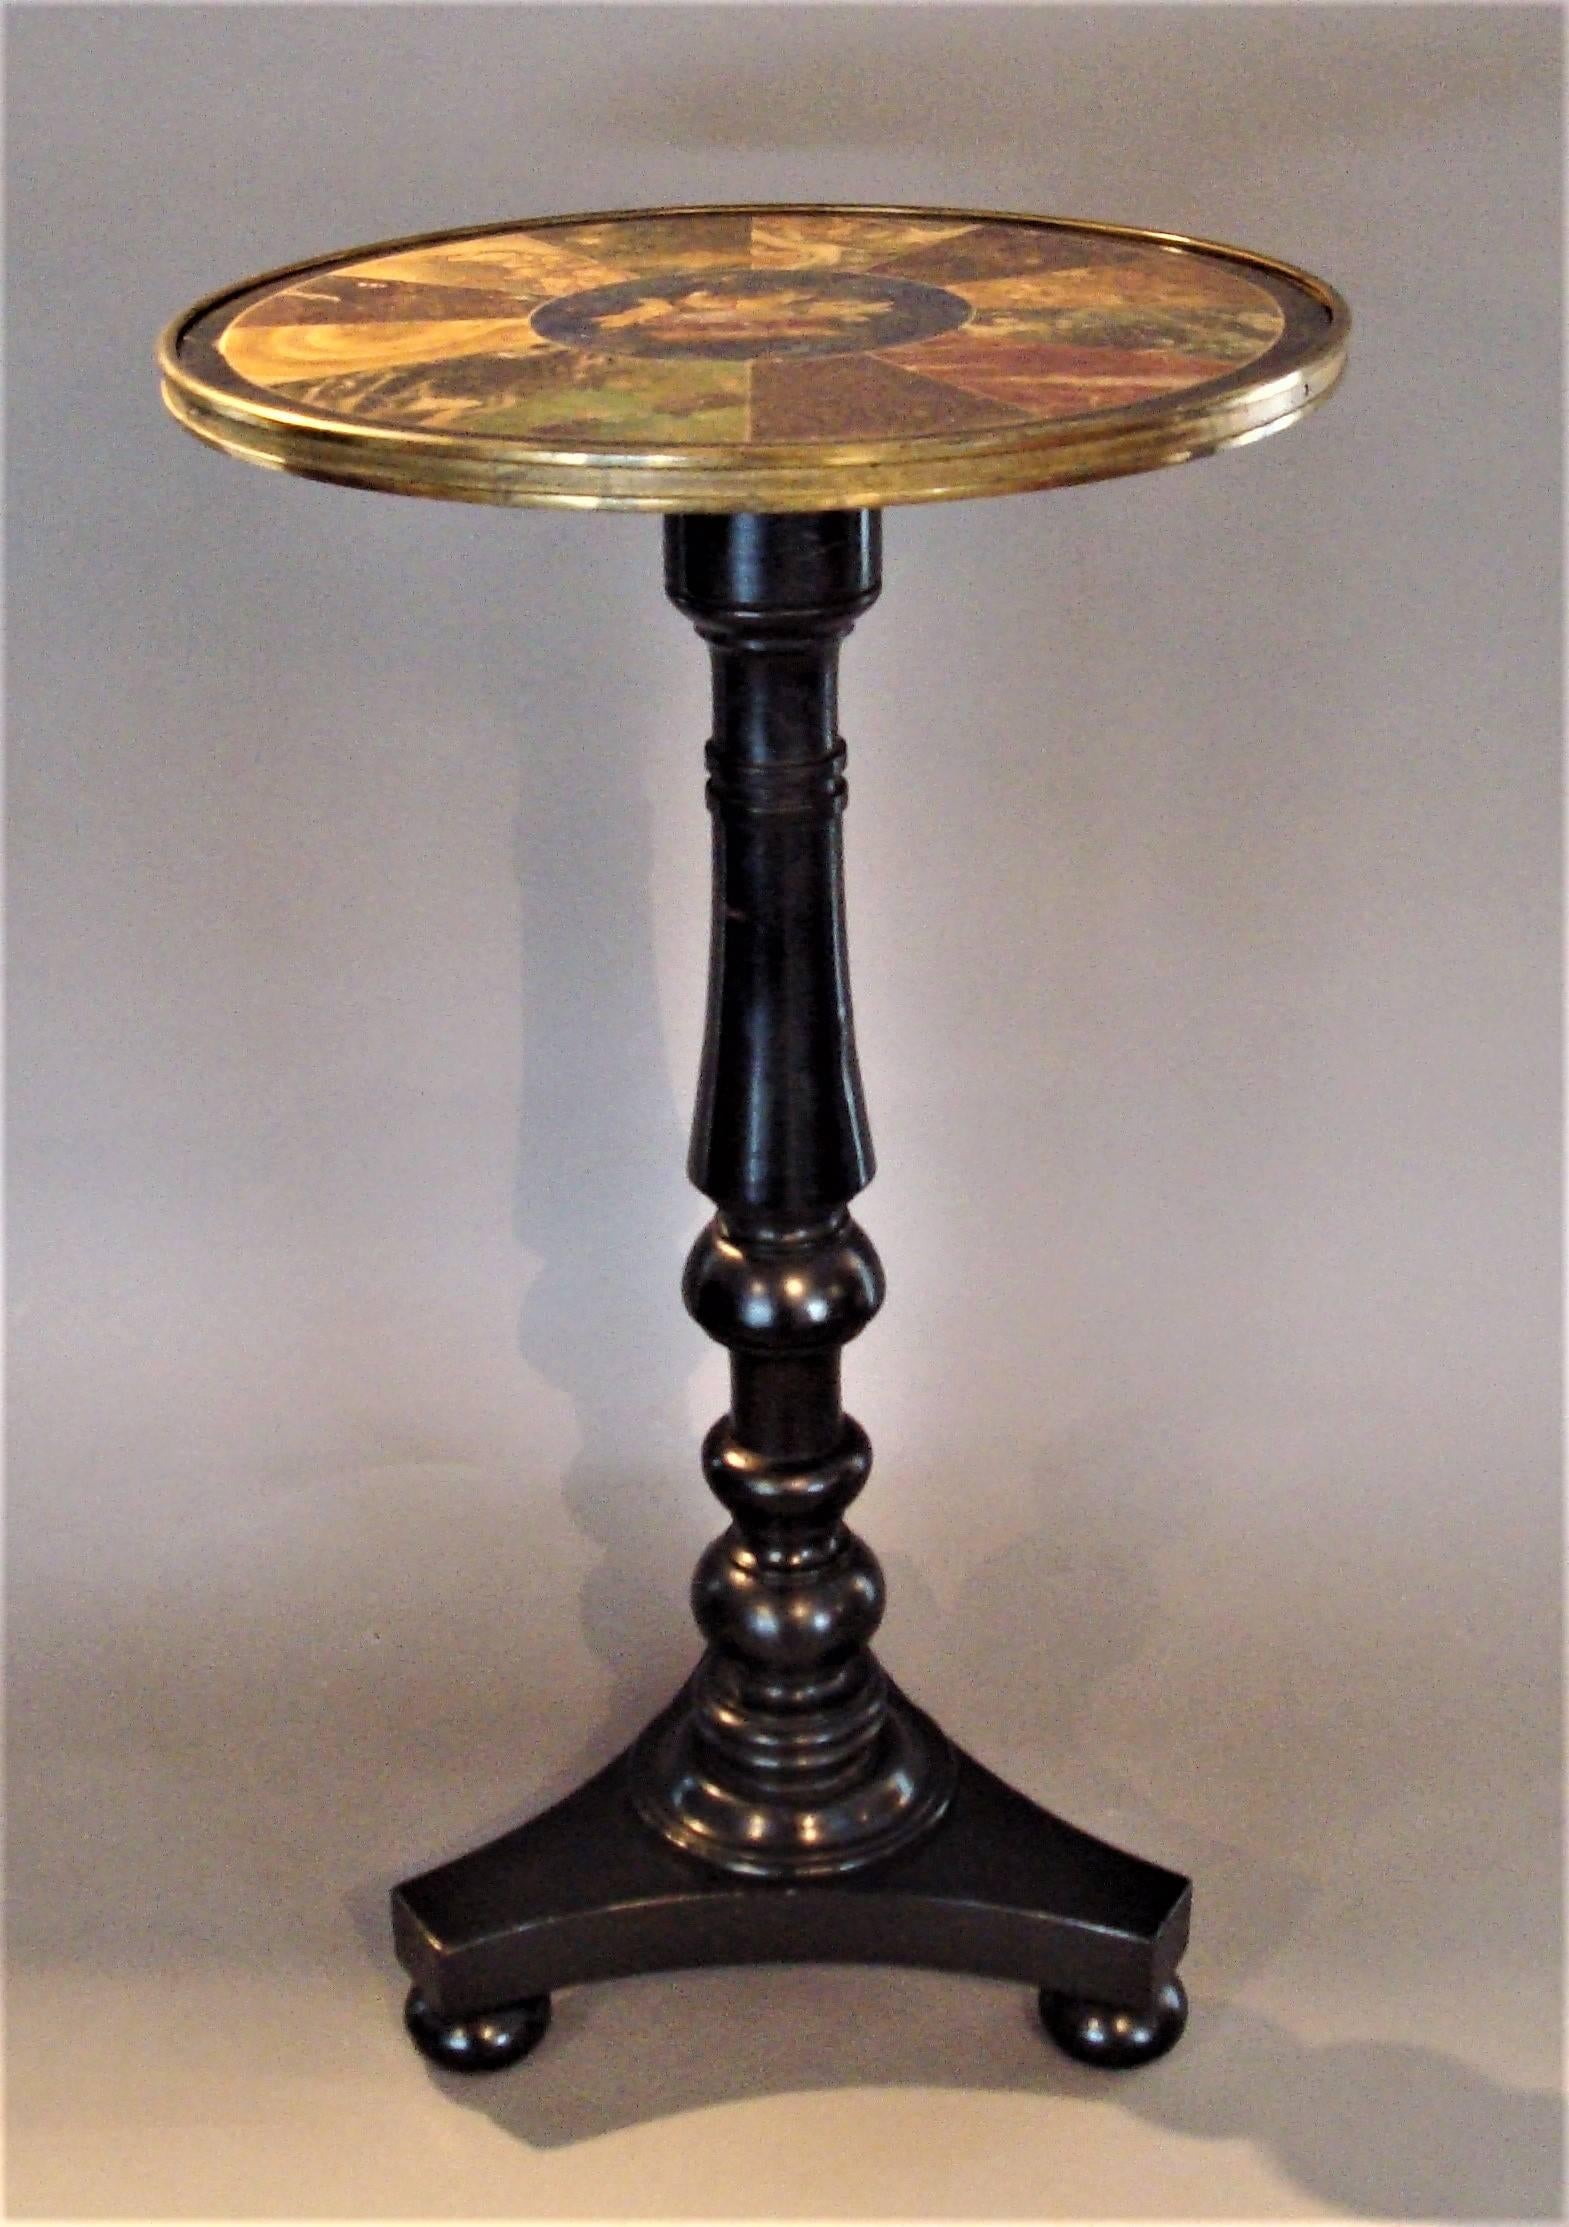 Good Regency painted simulated marble-top occasional table; the circular top decorated with a central panel with 'The Doves of Pliny' on a lapis lazuli background; with 12 radiating panels simulating specimen marbles including porphrey, agate,